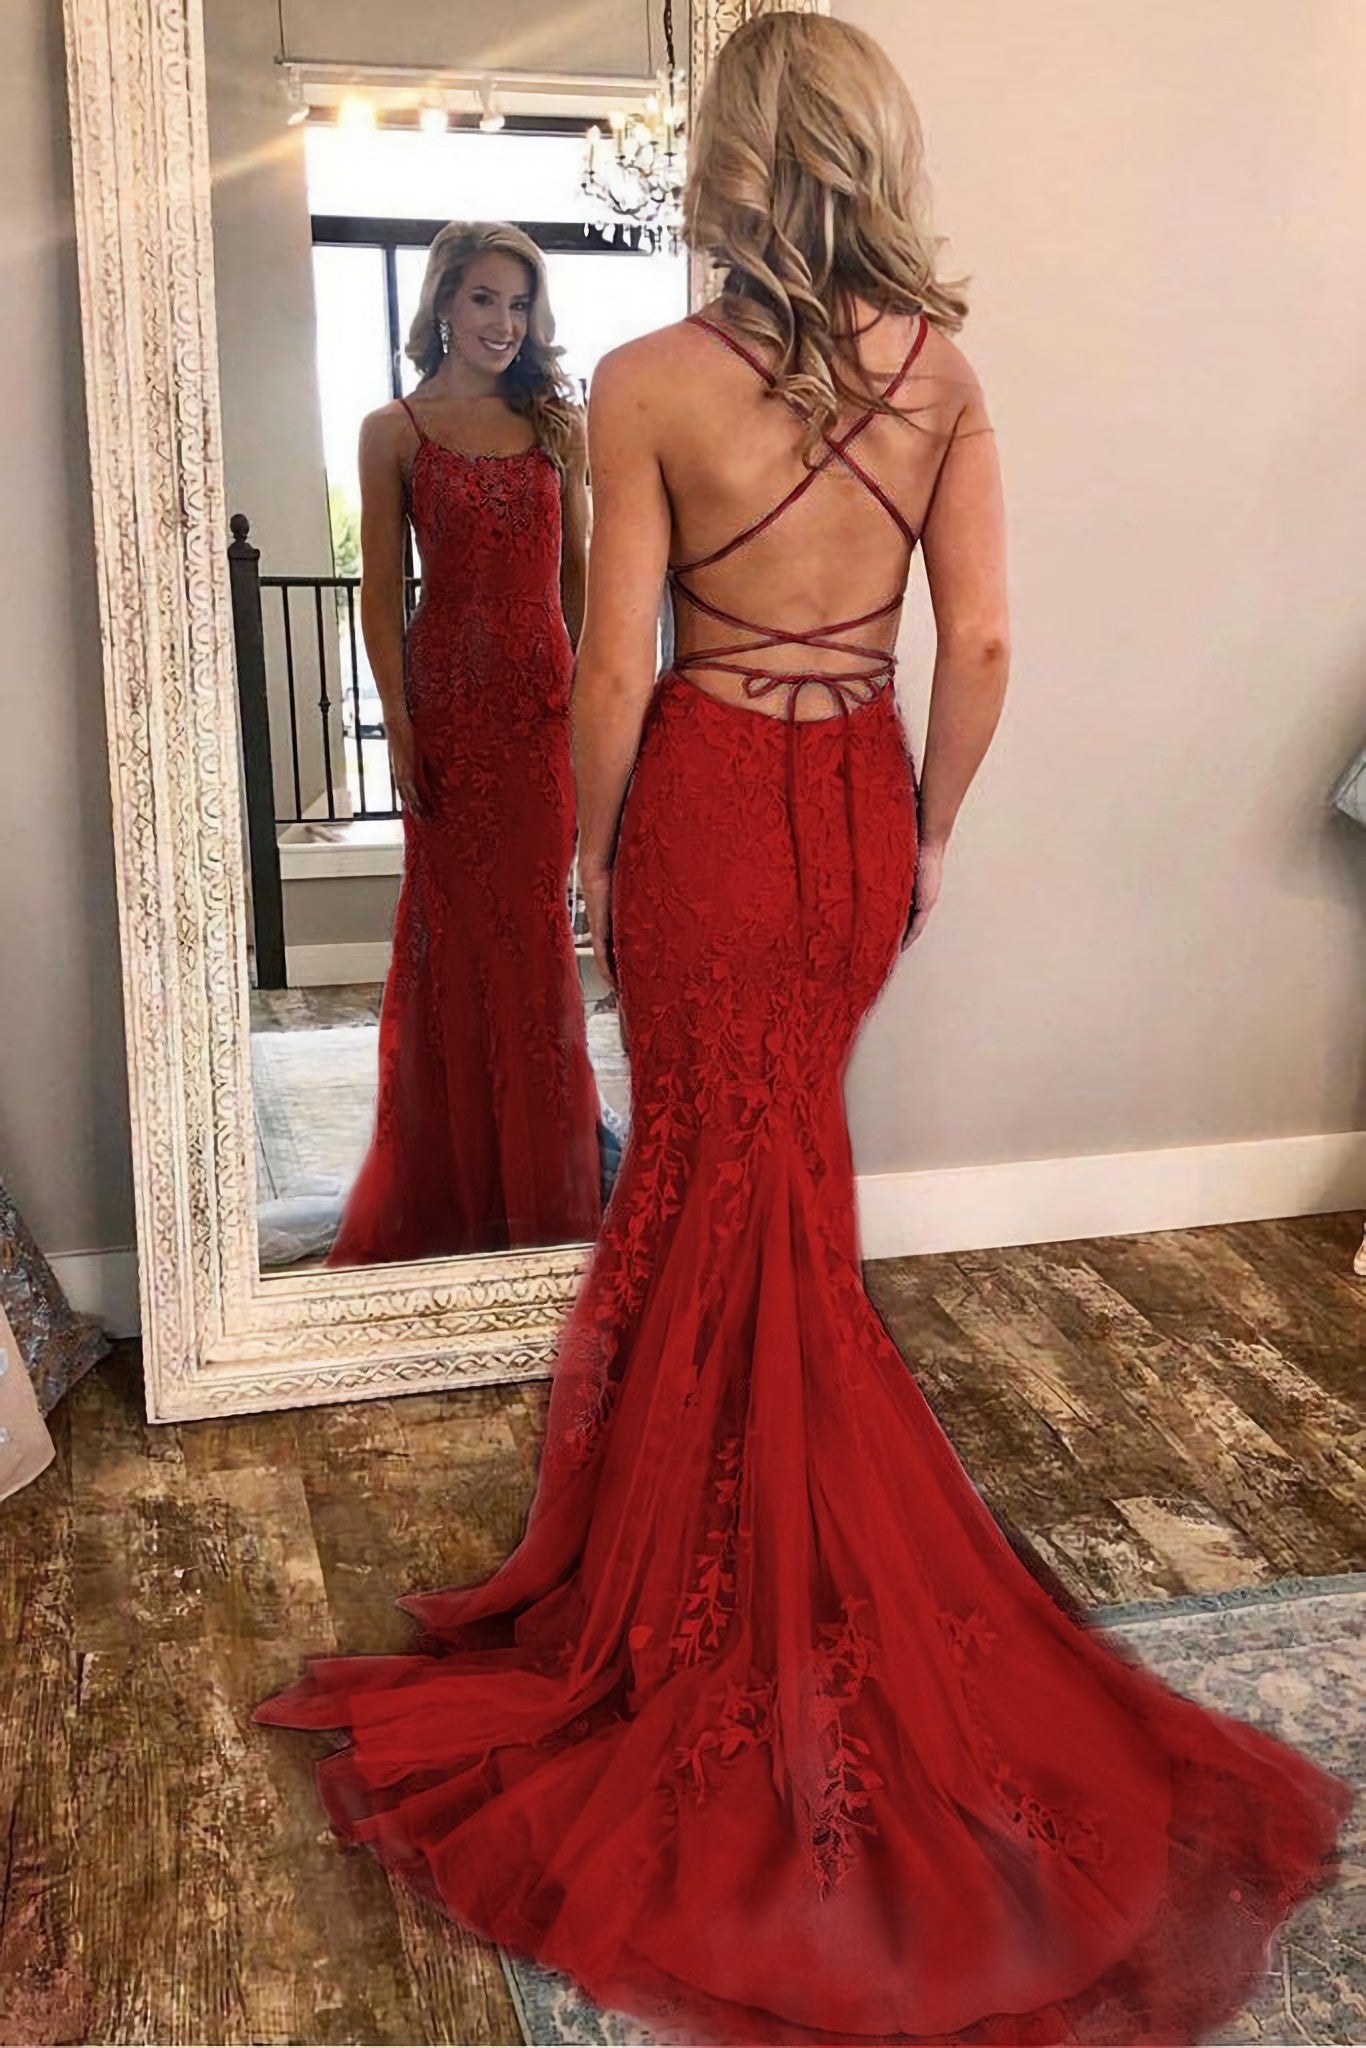 Red Spaghetti Strap Mermaid Prom Dresses With Lace Appliques Backless Formal Dress